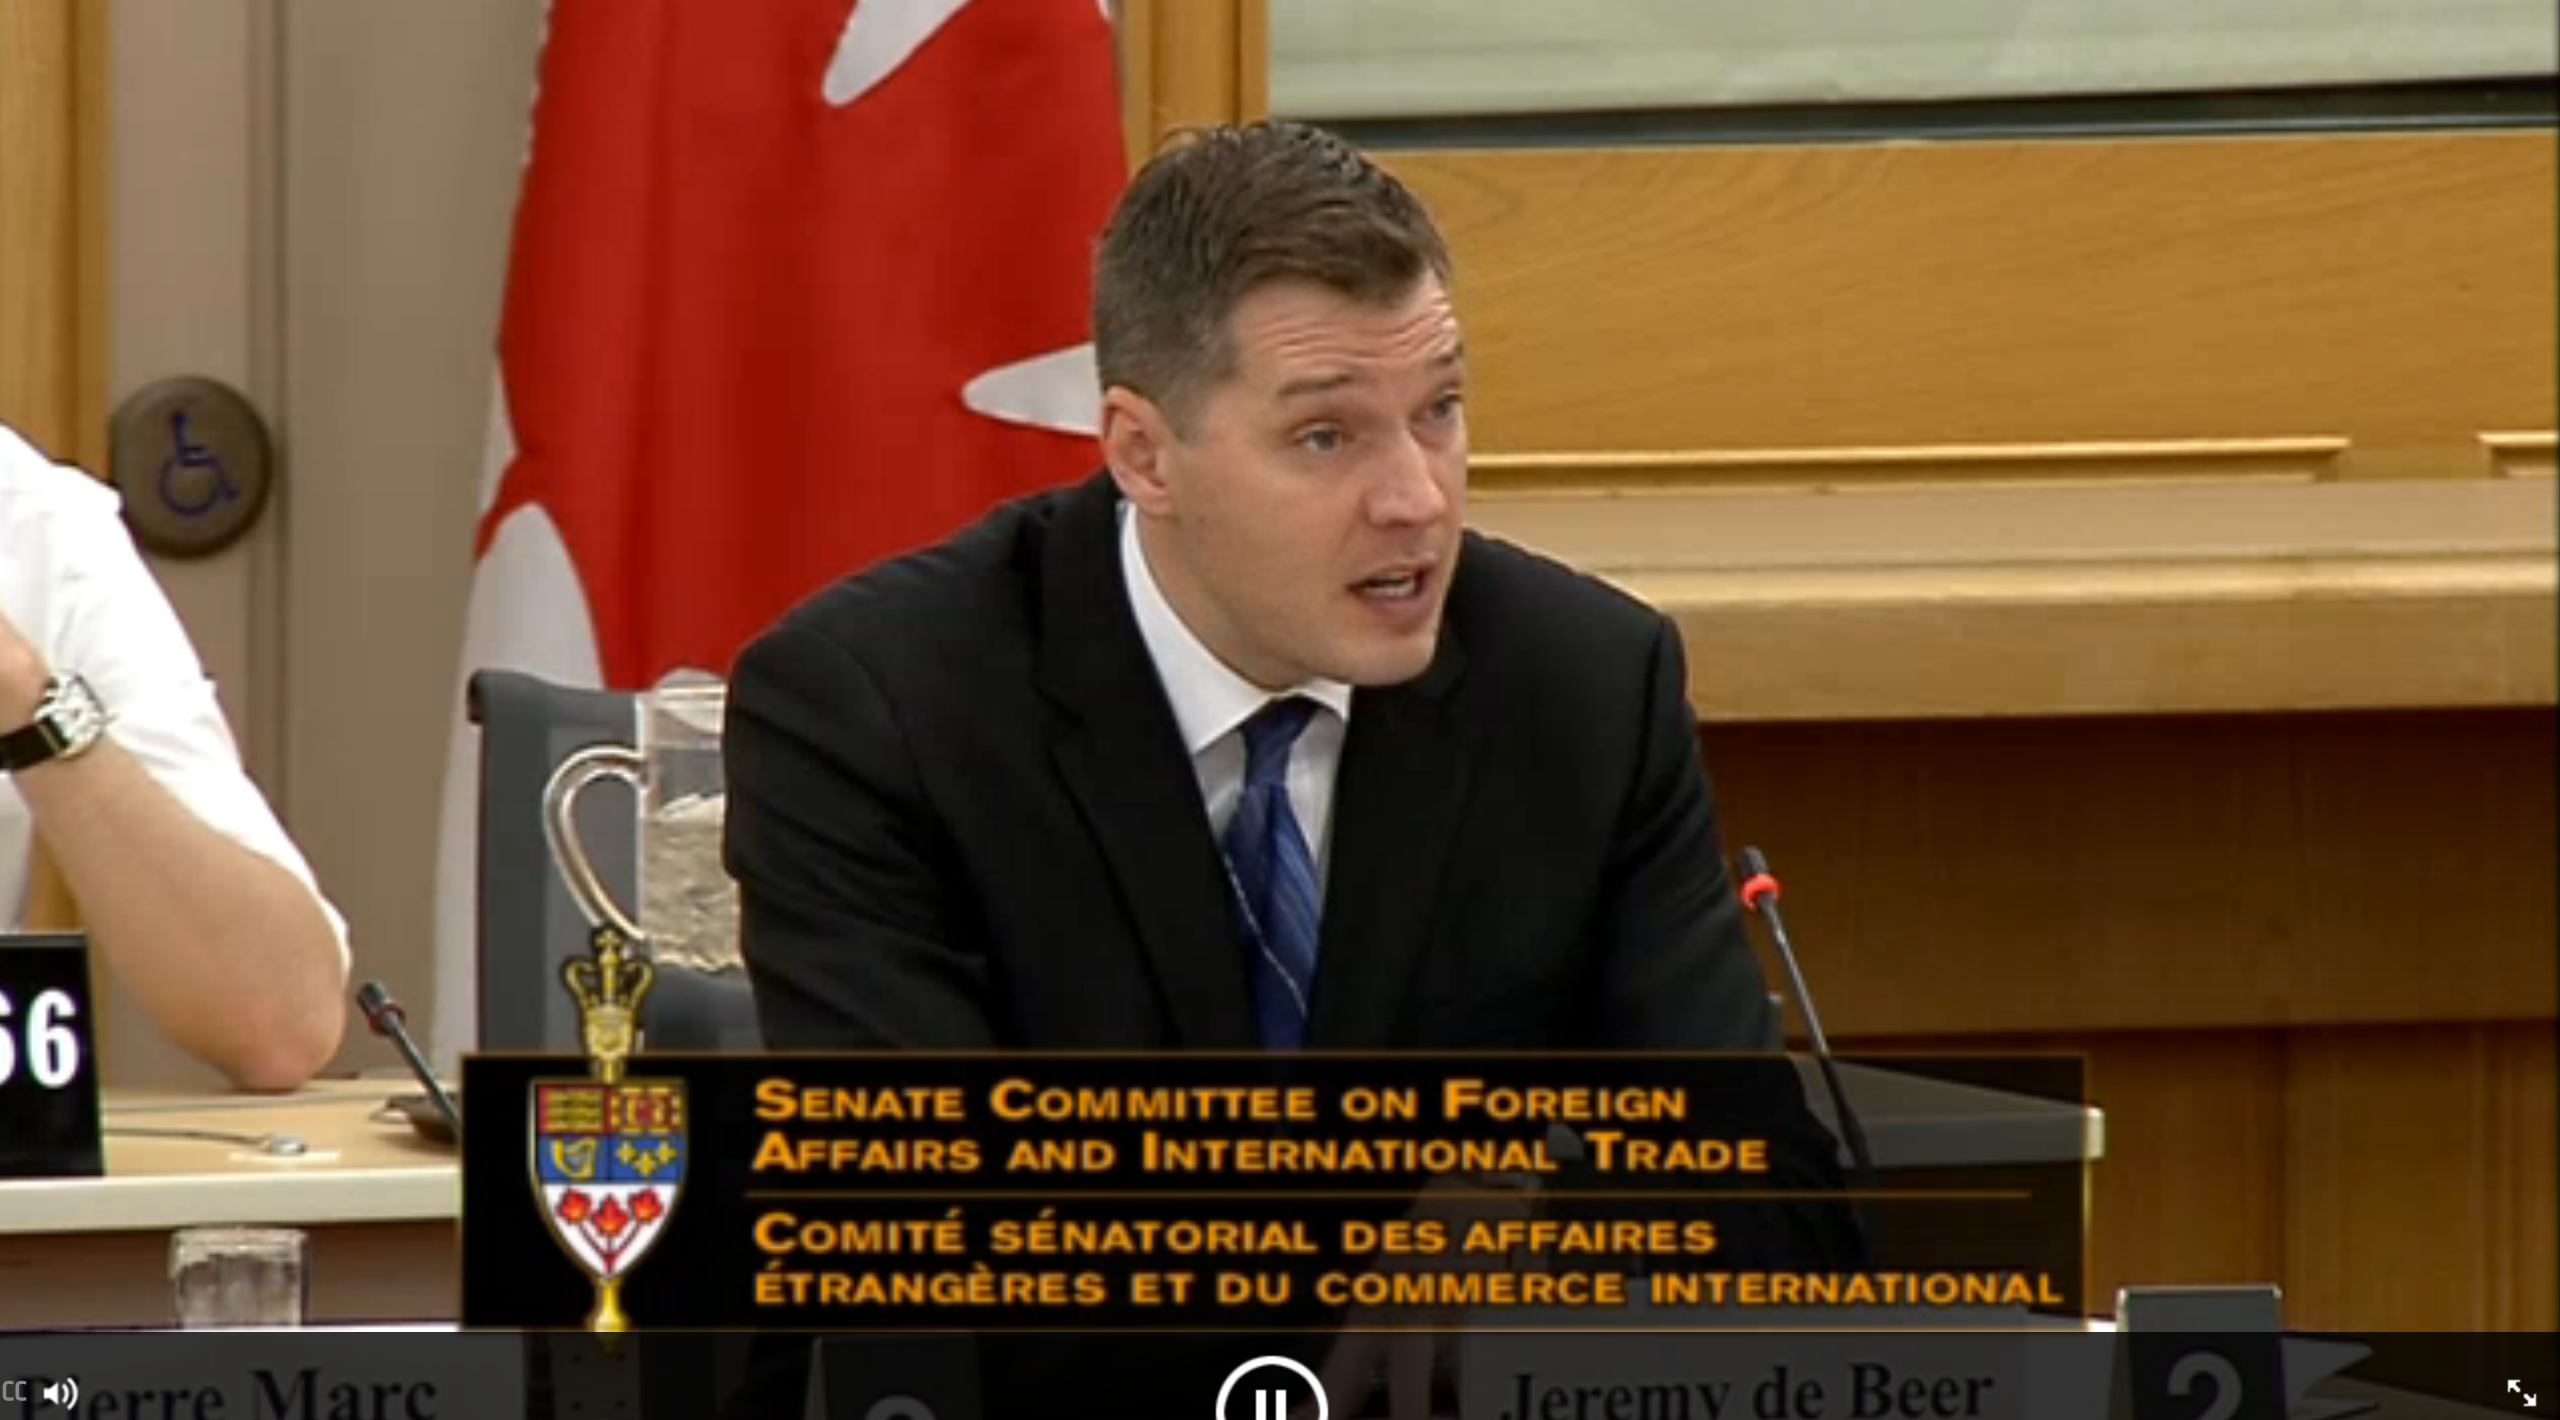 Professor de Beer testifies to Senate about CETA, intellectual property and innovation.